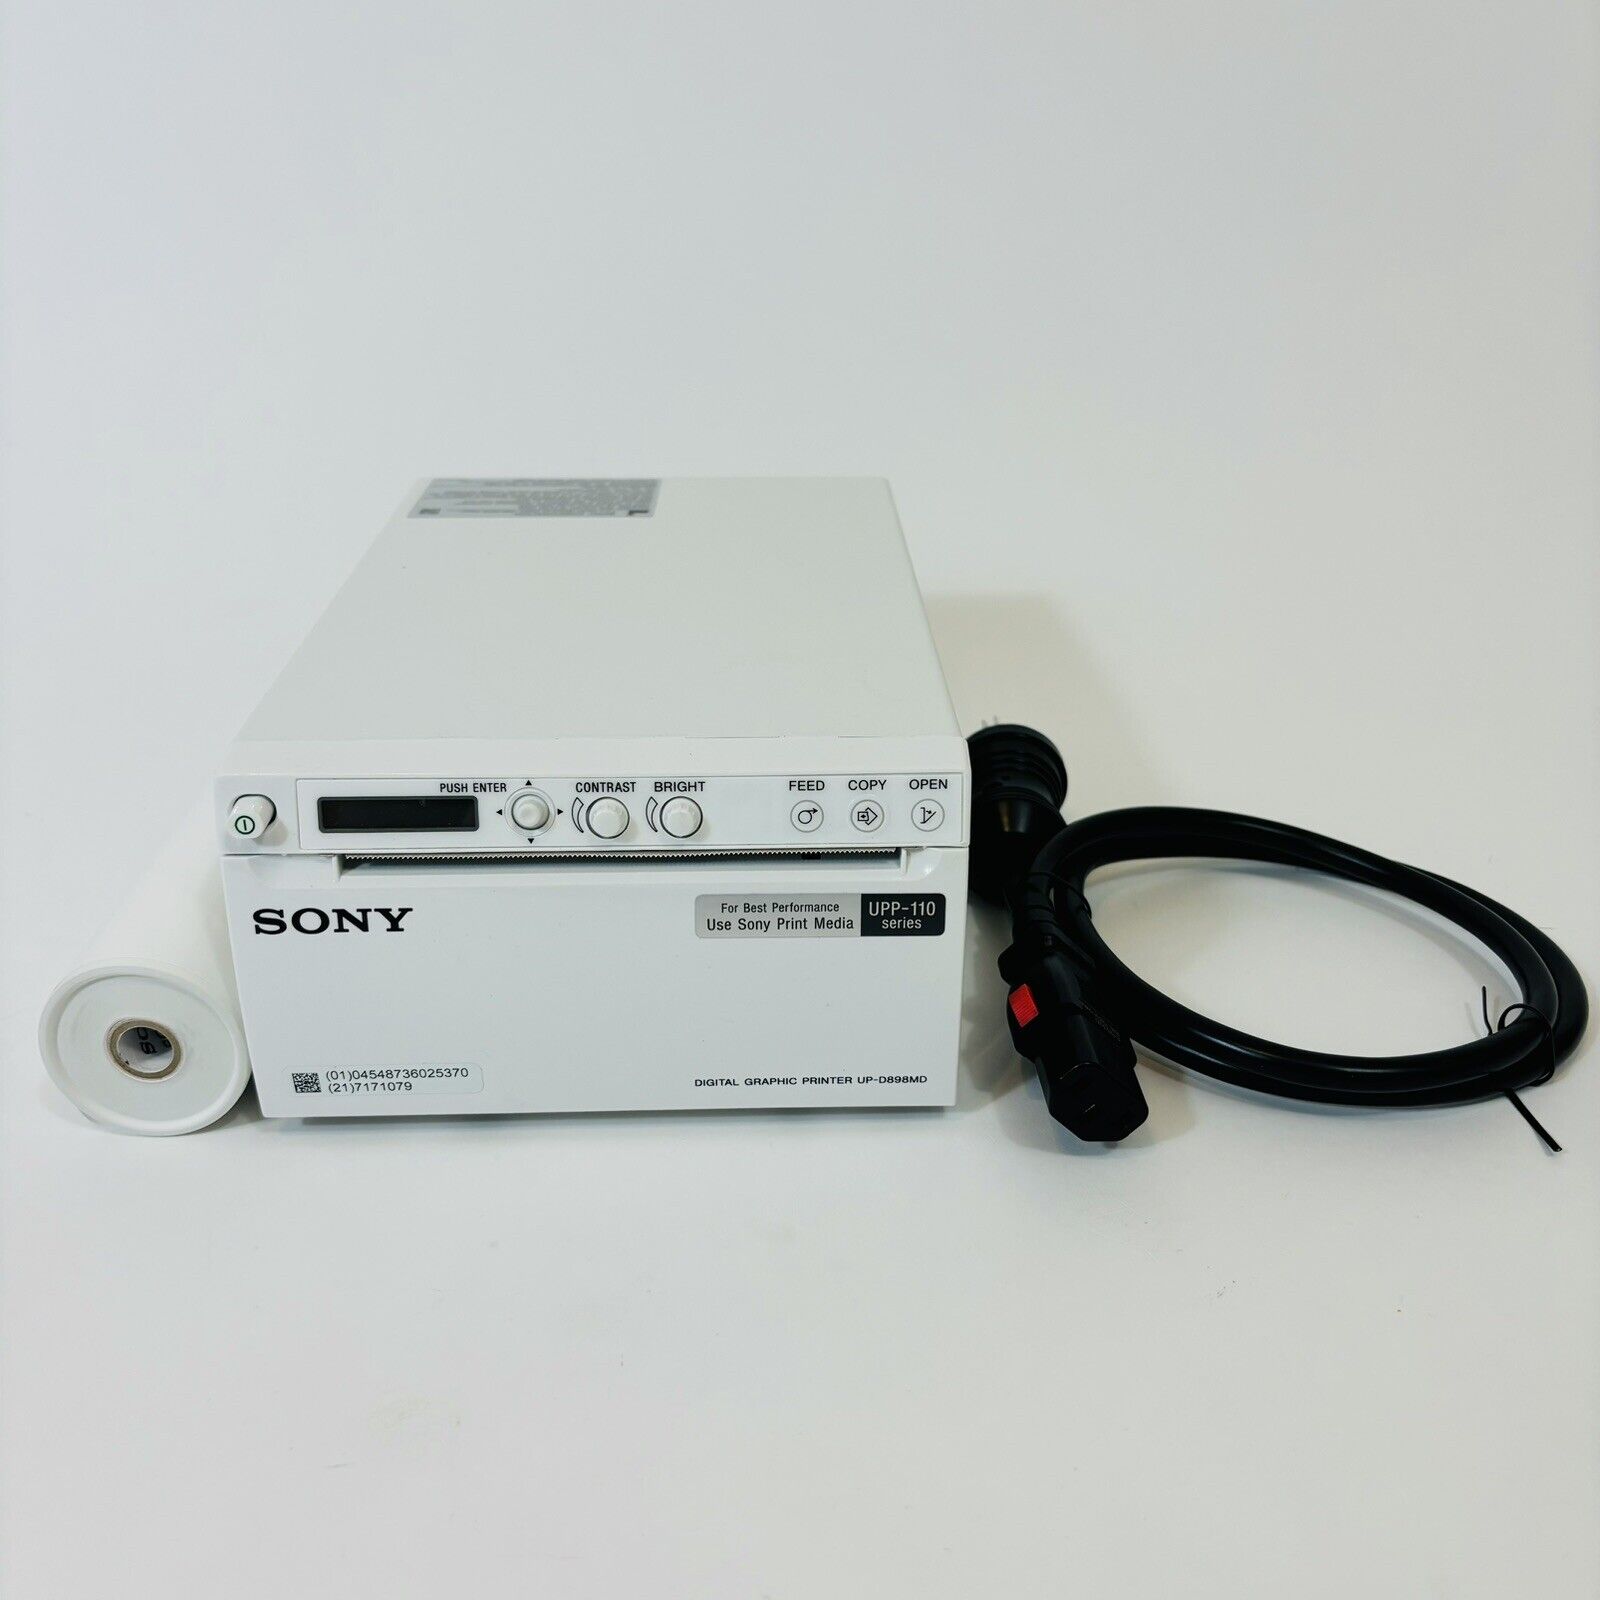 Sony UP-D898MD White Digital Graphic Thermal Printer With Cord Tested & Working